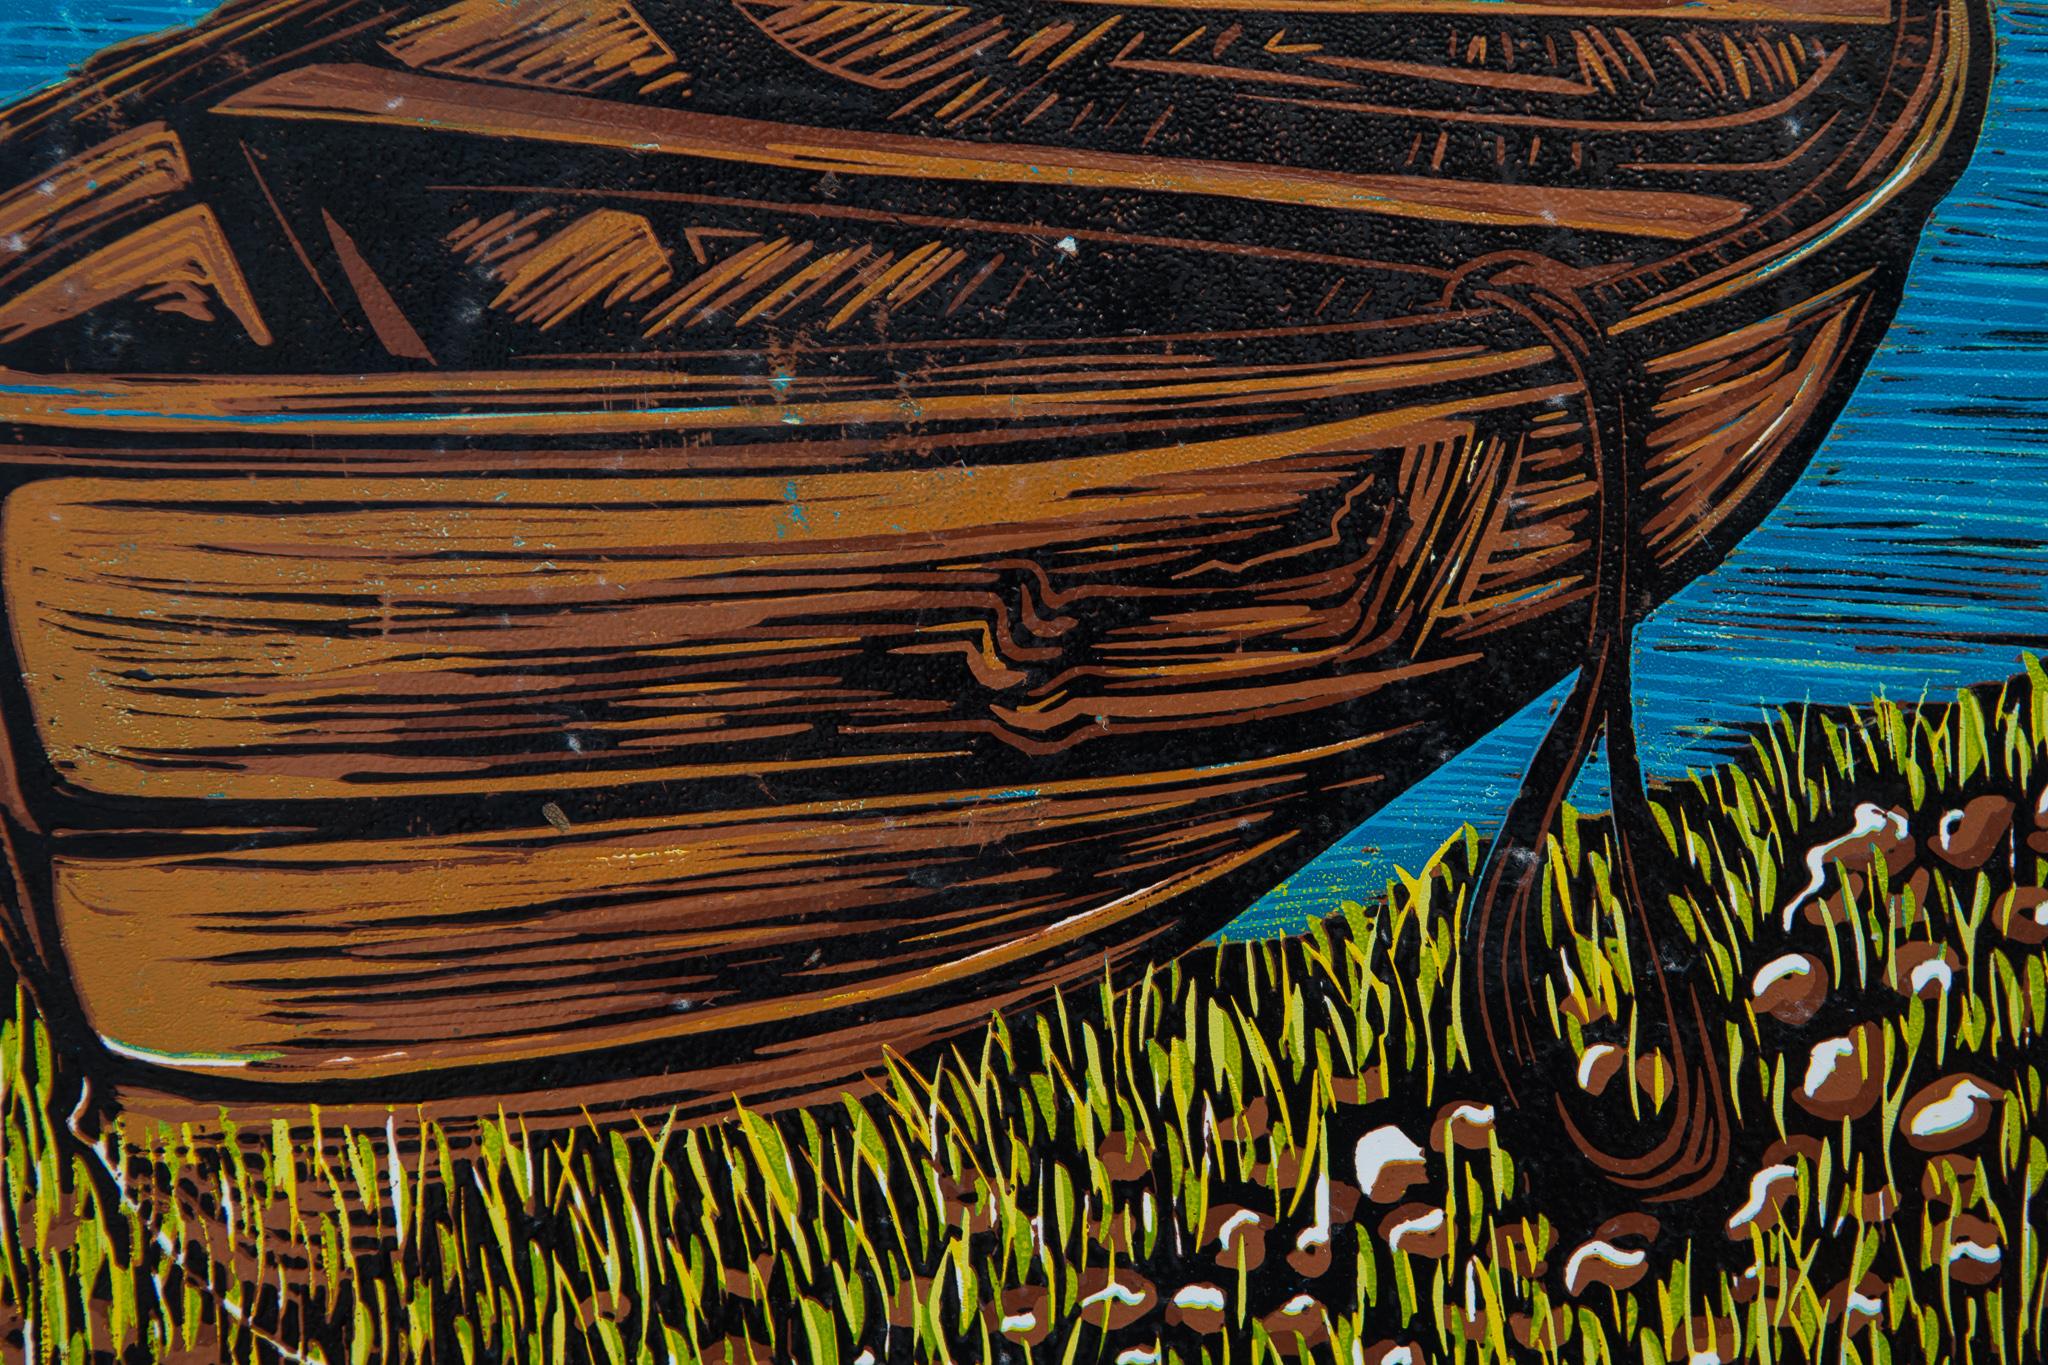 Let's go canoeing, 2019. Linoleum Block Print on Paper, 8/8

Lok Kandjengo was born in Ongwedieva in 1988. He moved to Windhoek to study visual art, first at the John Muafangejo Art Centre and then at the College of the Arts. Kandjengo graduated in